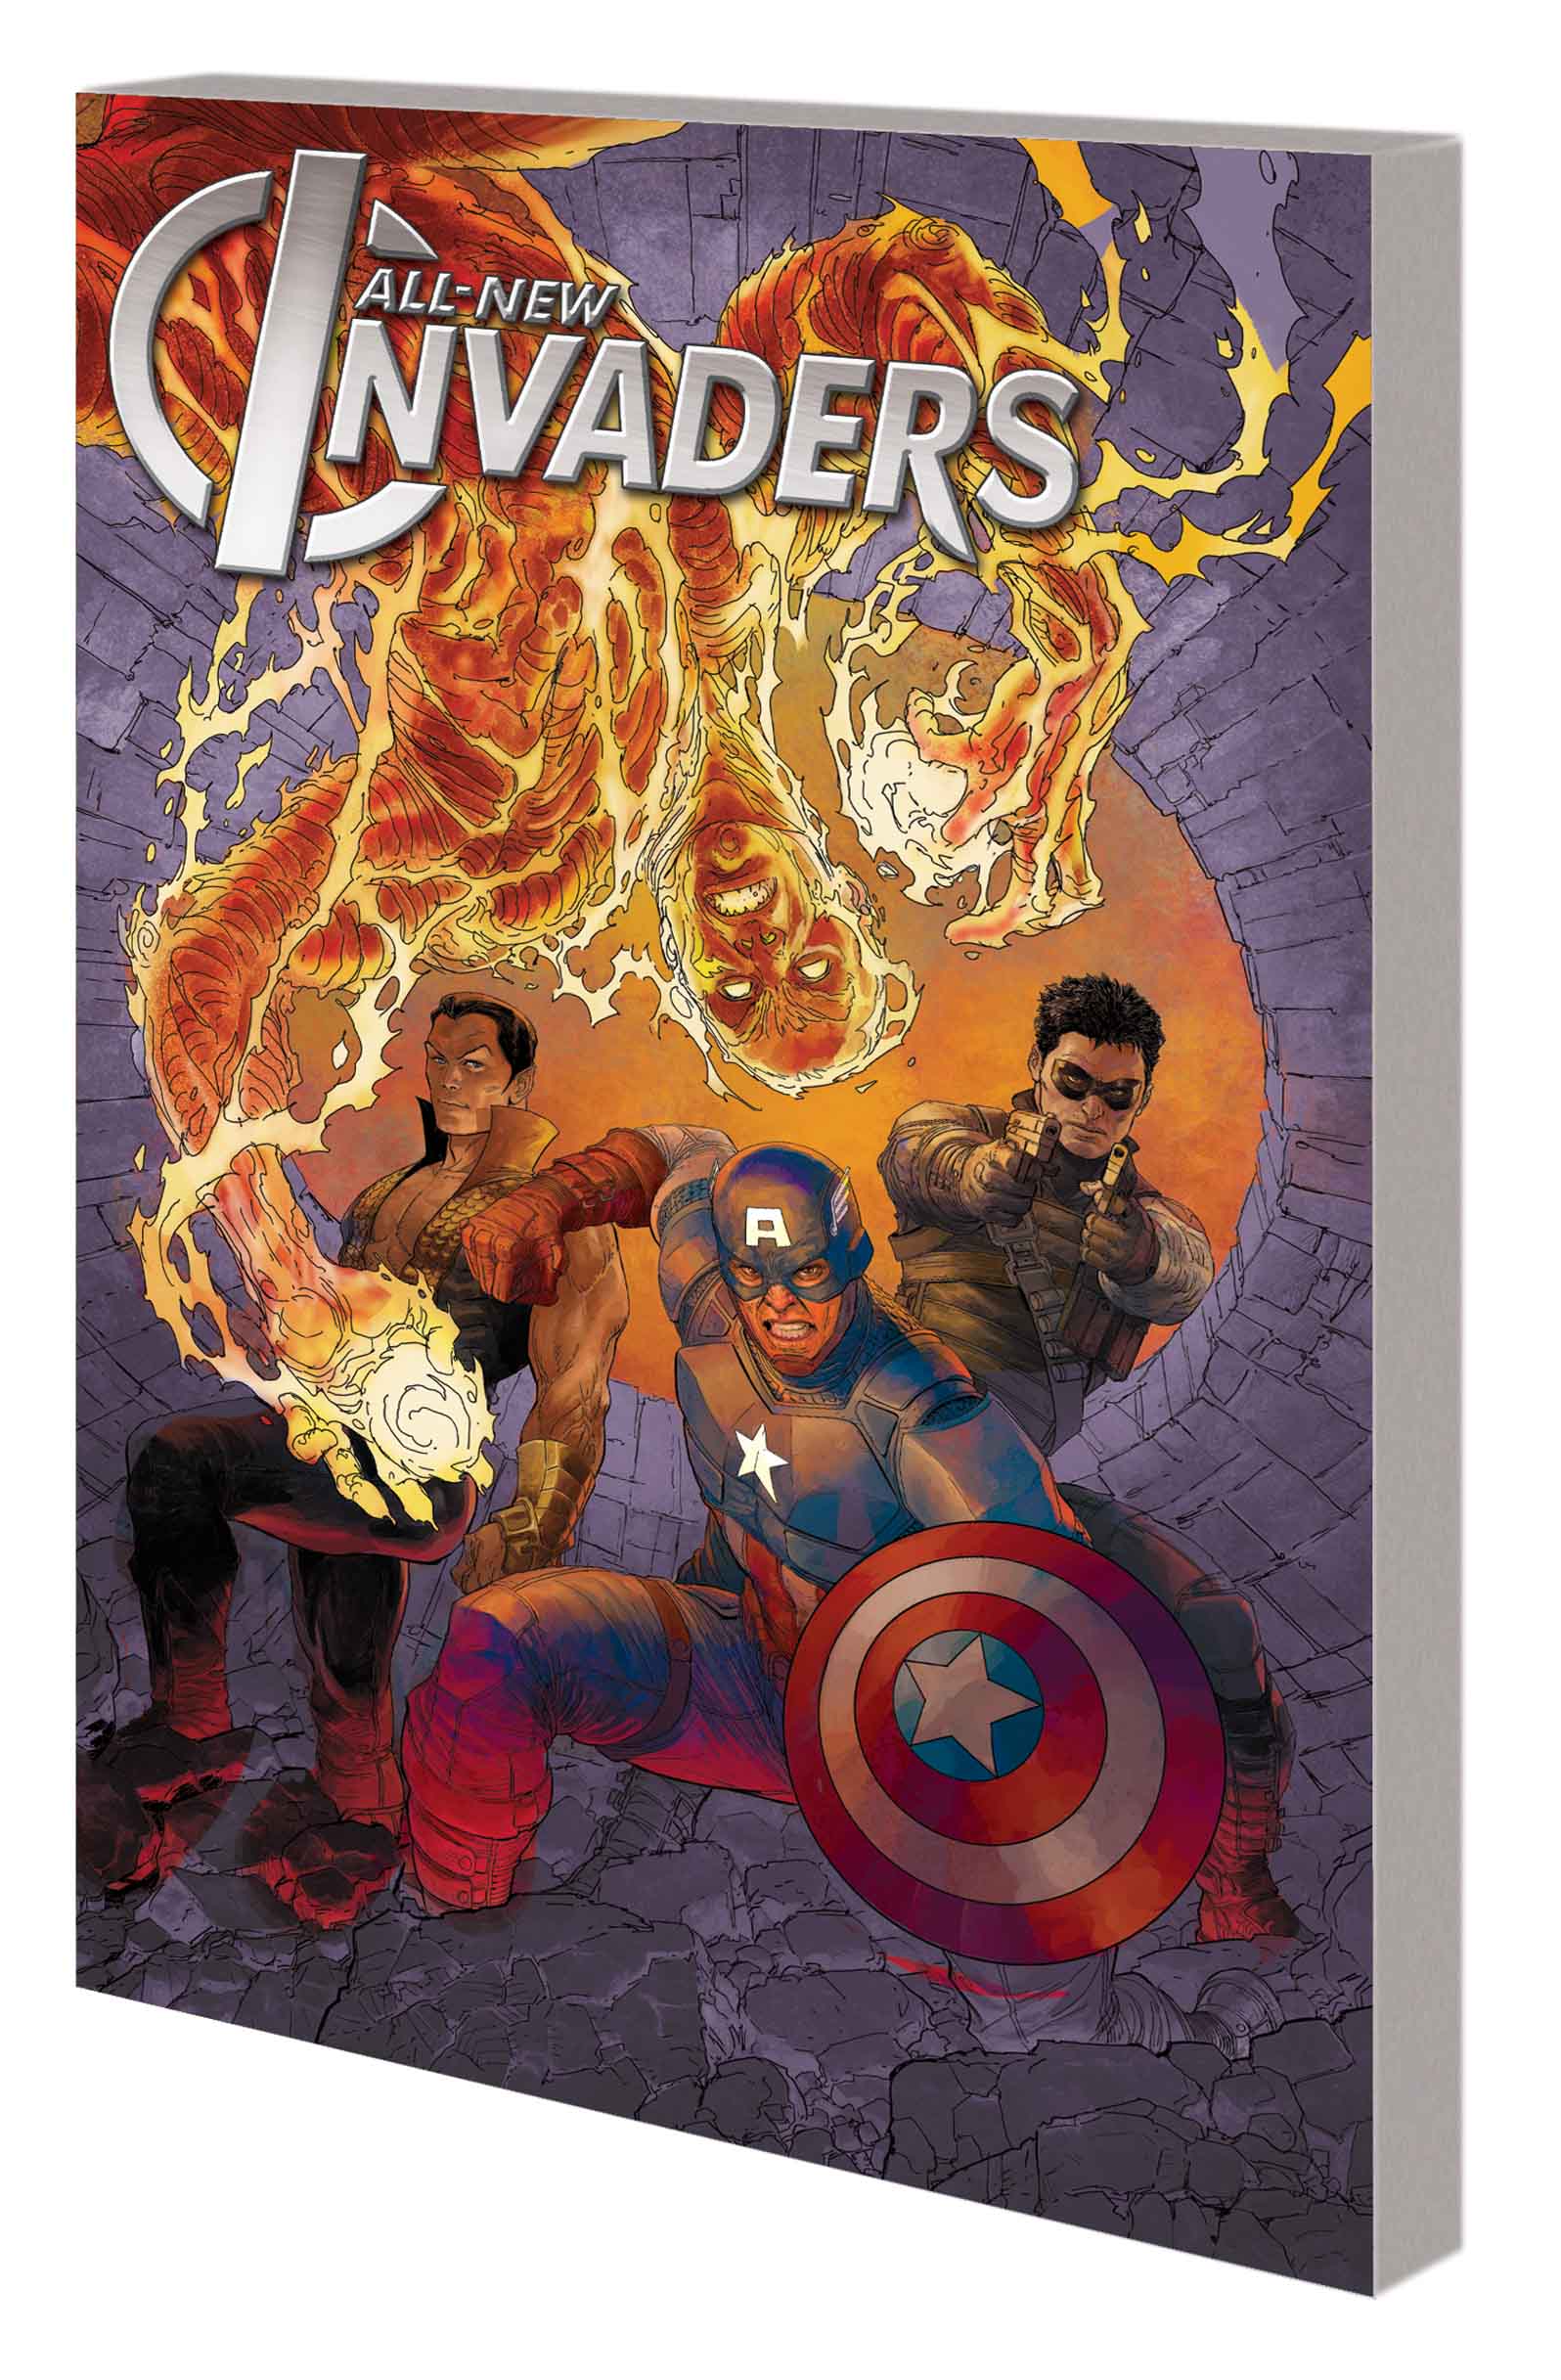 All-New Invaders Vol. 1: Gods and Soldiers (Trade Paperback)